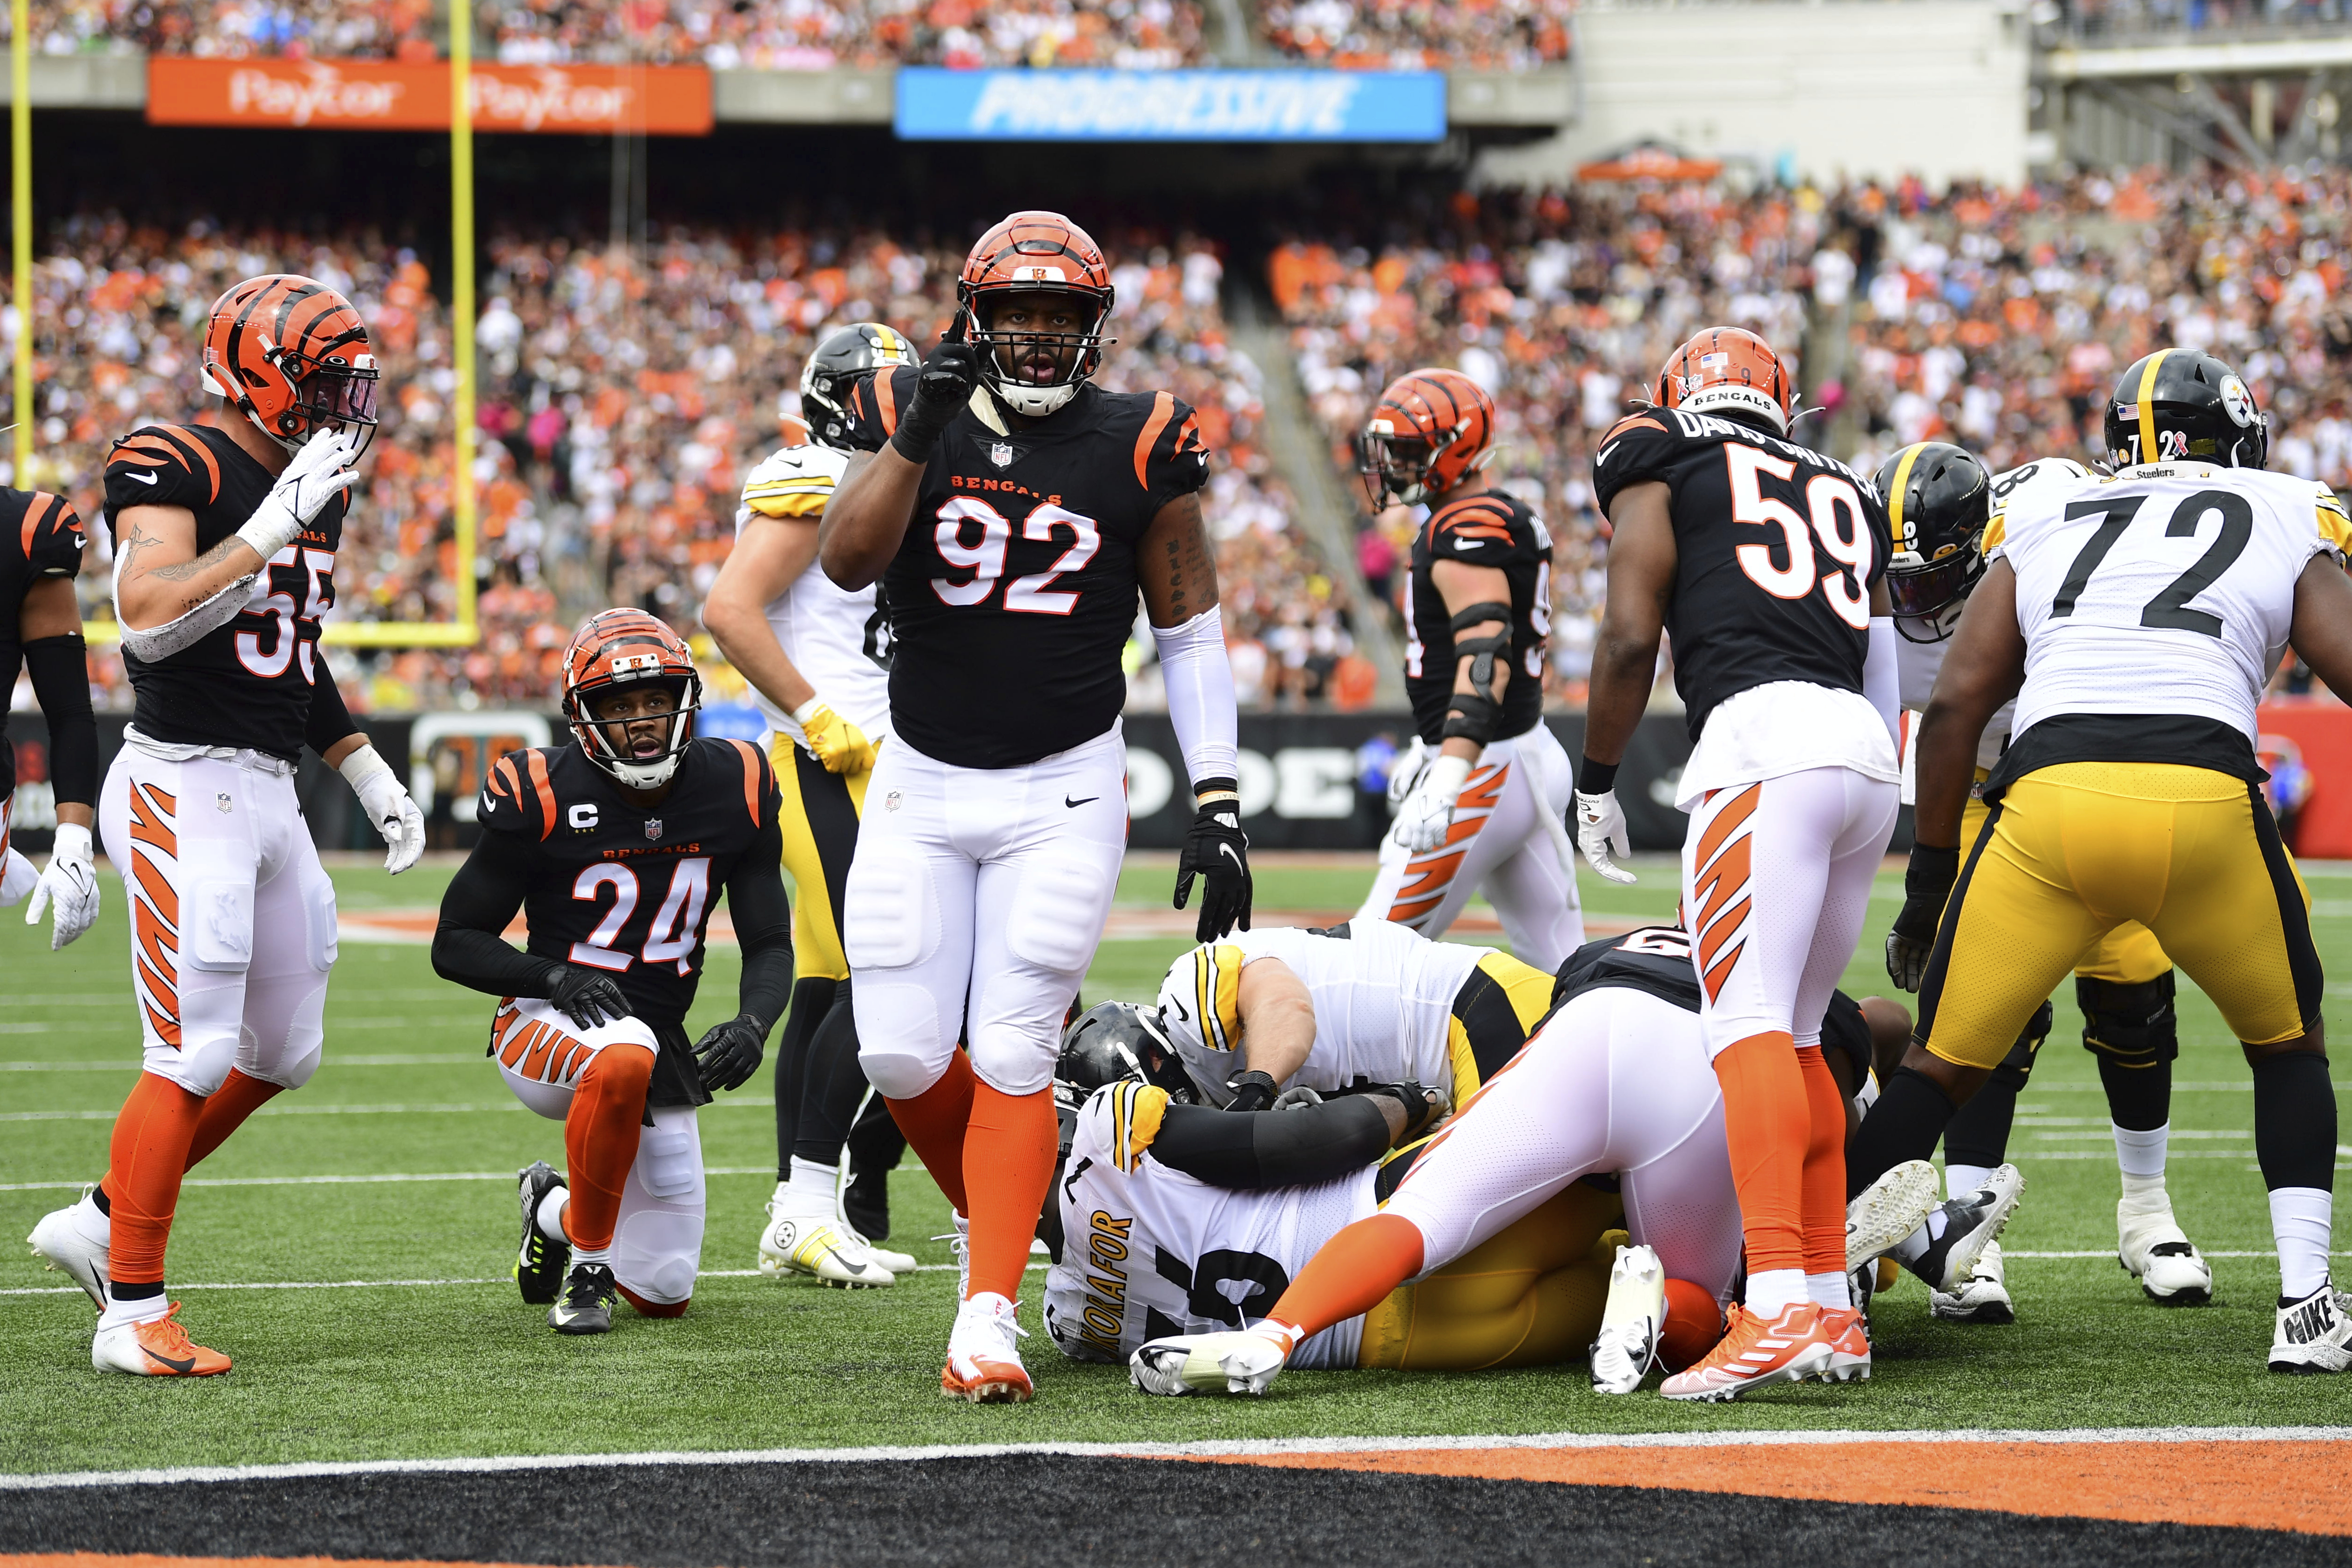 How Logan Wilson, B.J. Hill and the rest of the Bengals defense